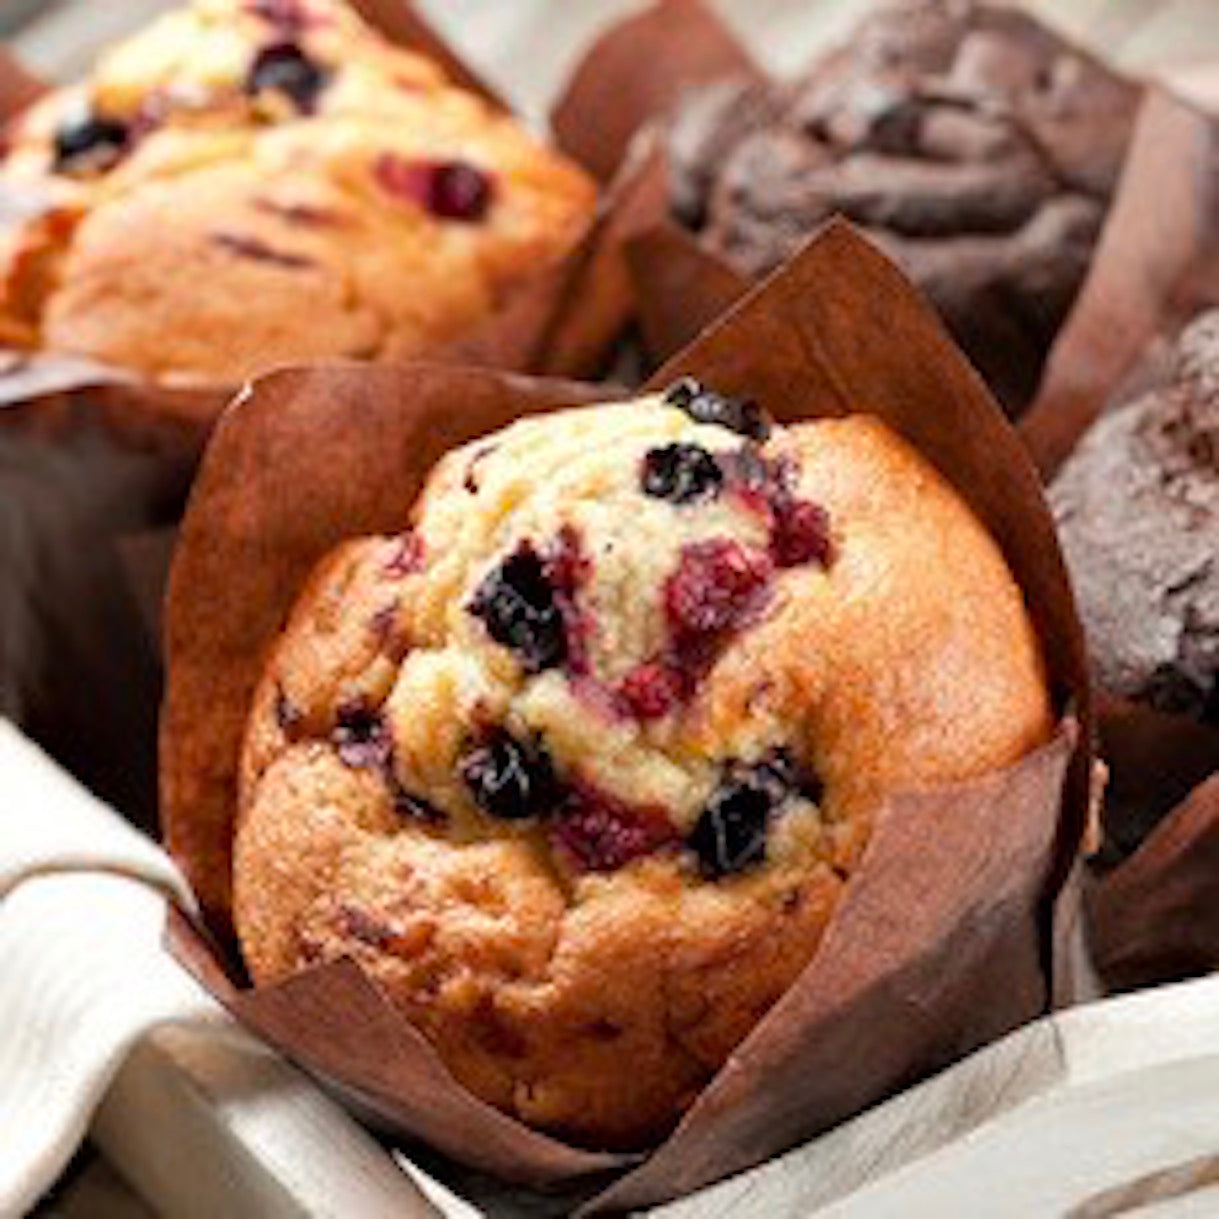 muffin-blueberry-topping-crumble-online-grocery-delivery-singapore-thenewgrocer